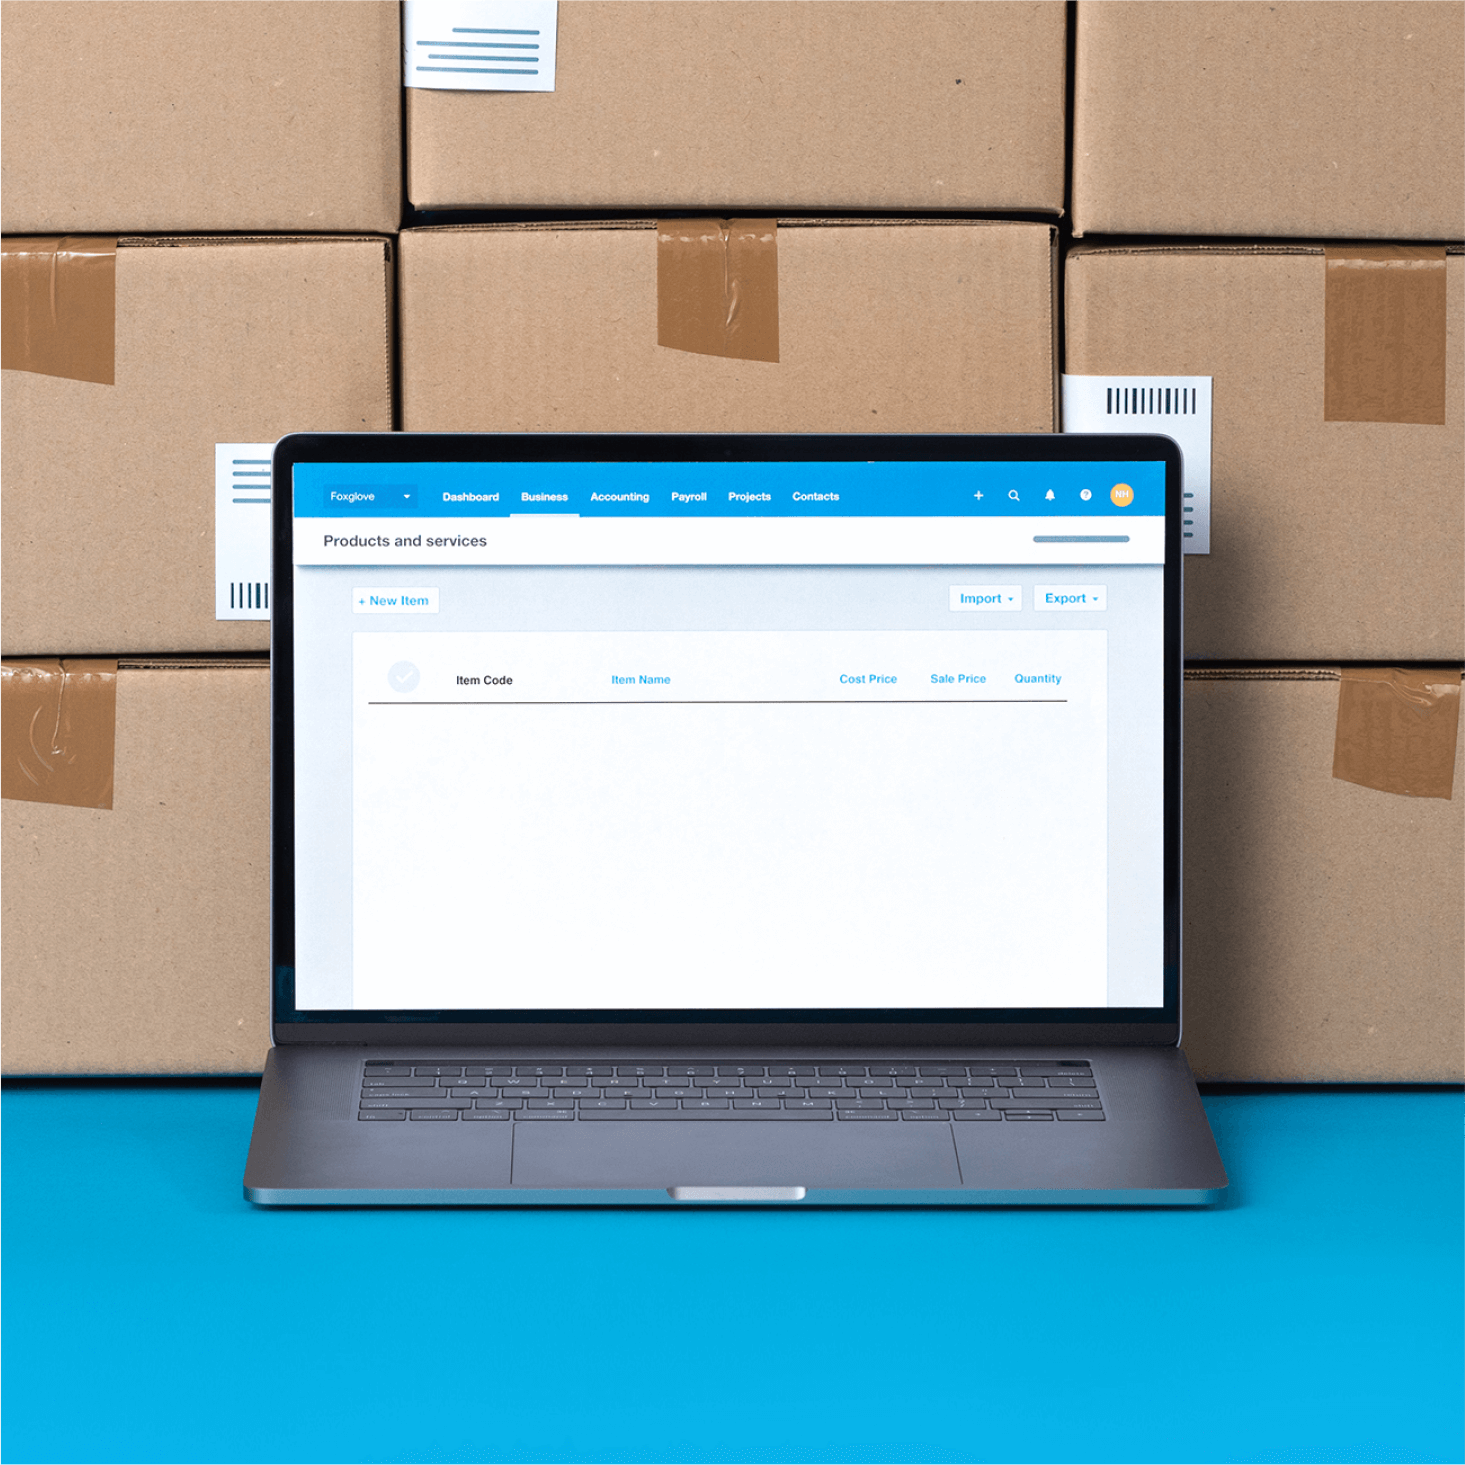 Unopened boxes containing new stock are stacked near a laptop that displays a list of inventory items in Xero.